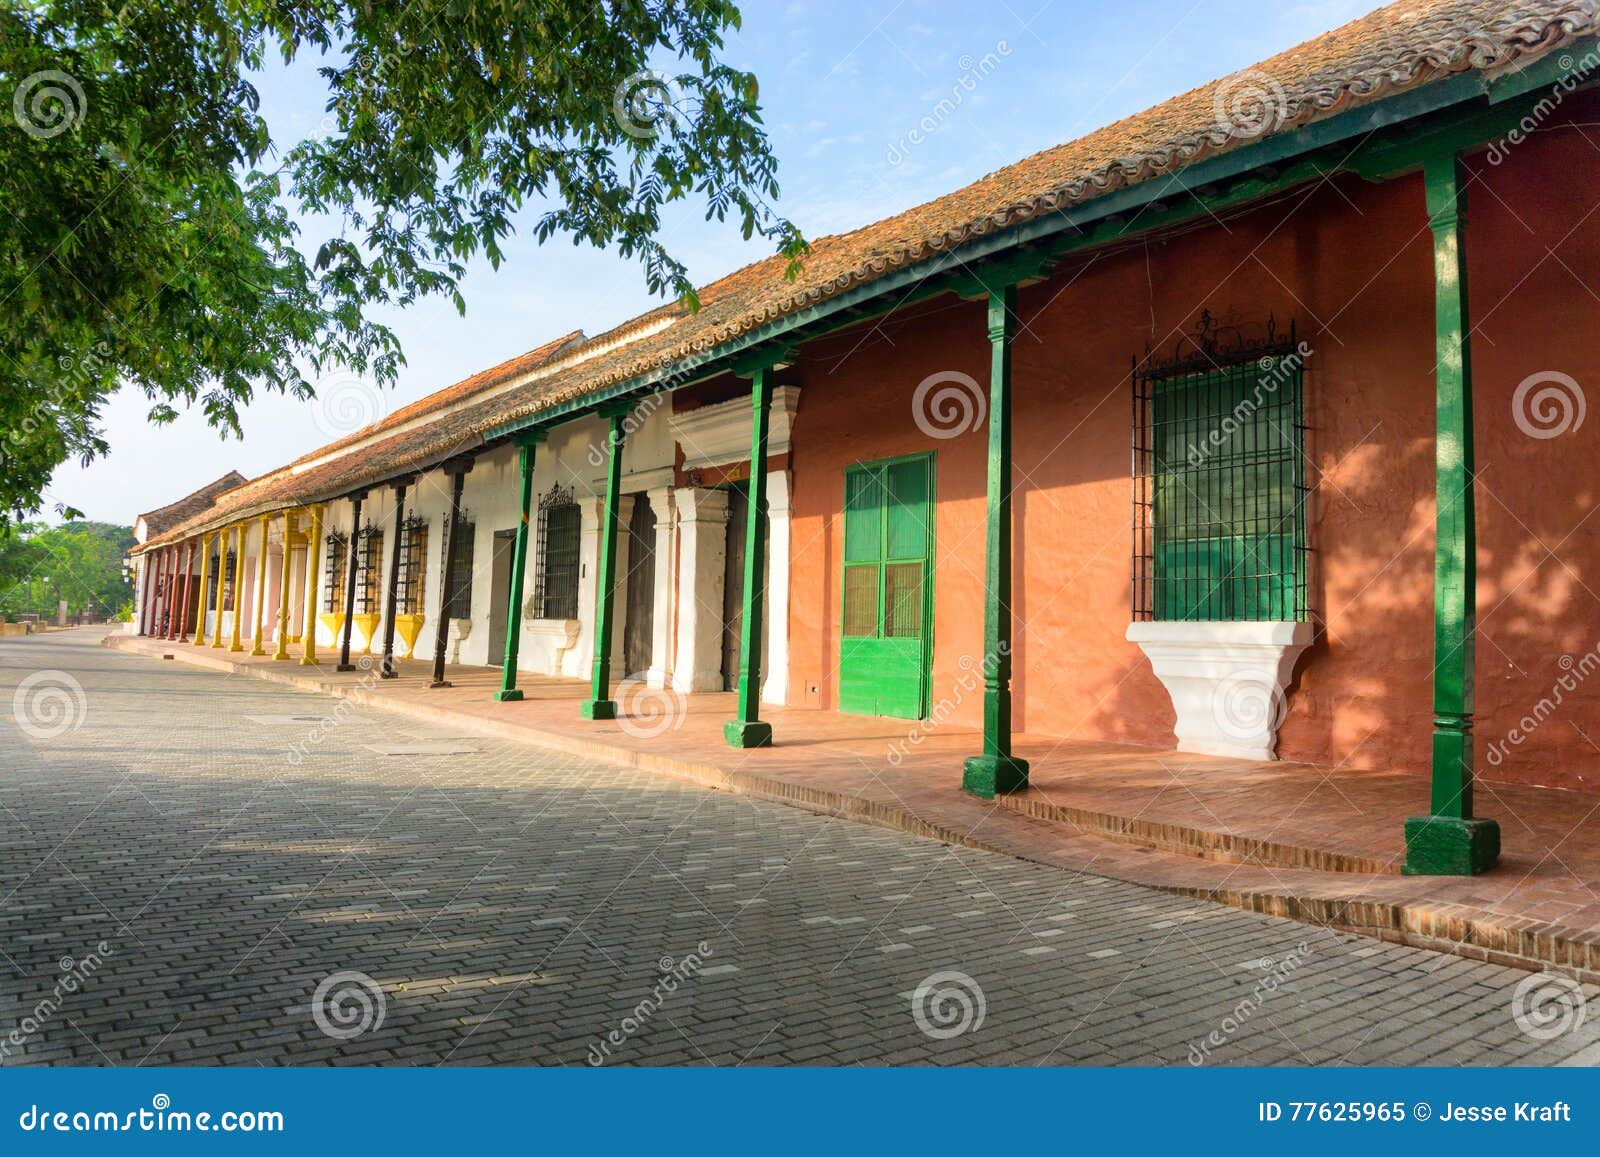 stunning colonial architecture in mompox